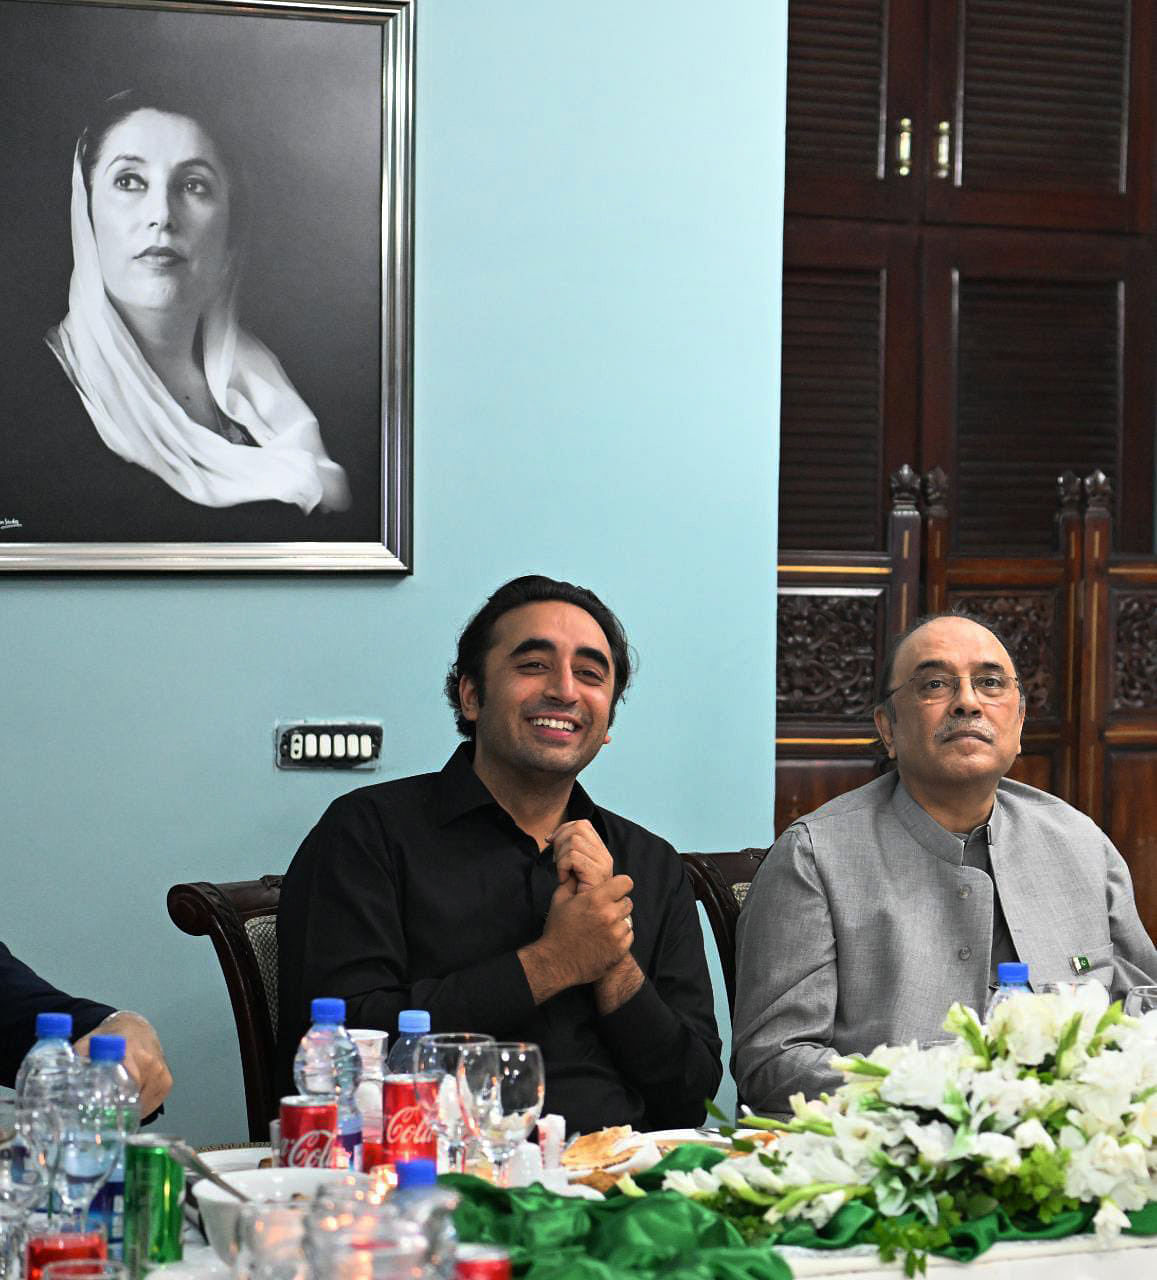 In this 5 April photo shared by Bakhtawar on Twitter, a portrait of the late Benazir Bhutto hangs in the room as Bilawal shares a light moment with his father Asif Ali Zardari | @BakhtawarBZ